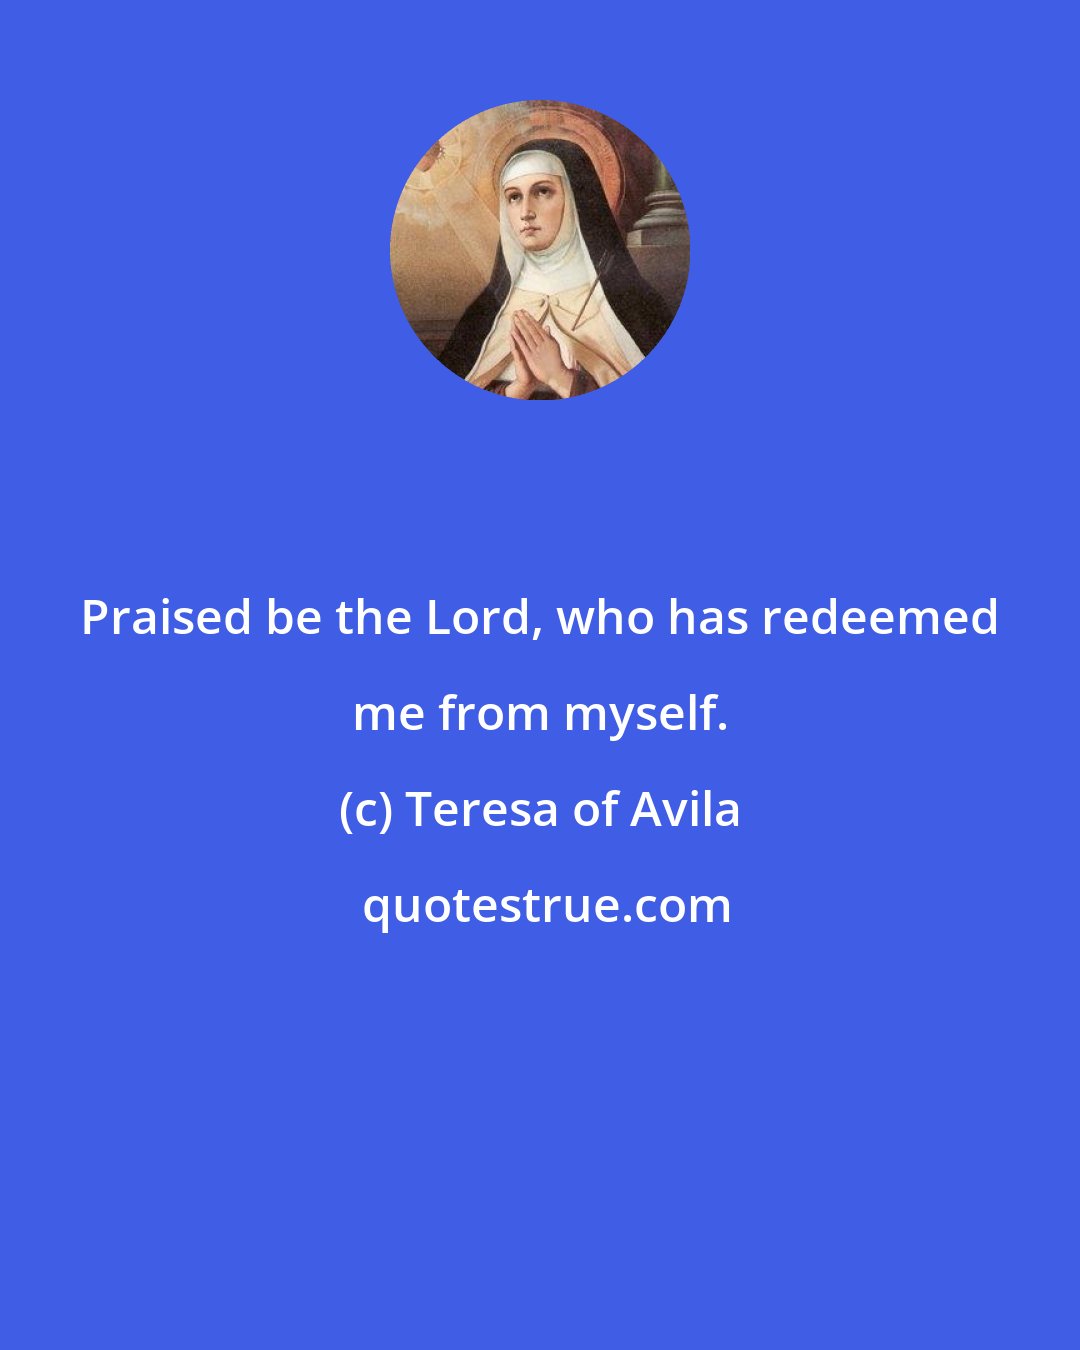 Teresa of Avila: Praised be the Lord, who has redeemed me from myself.